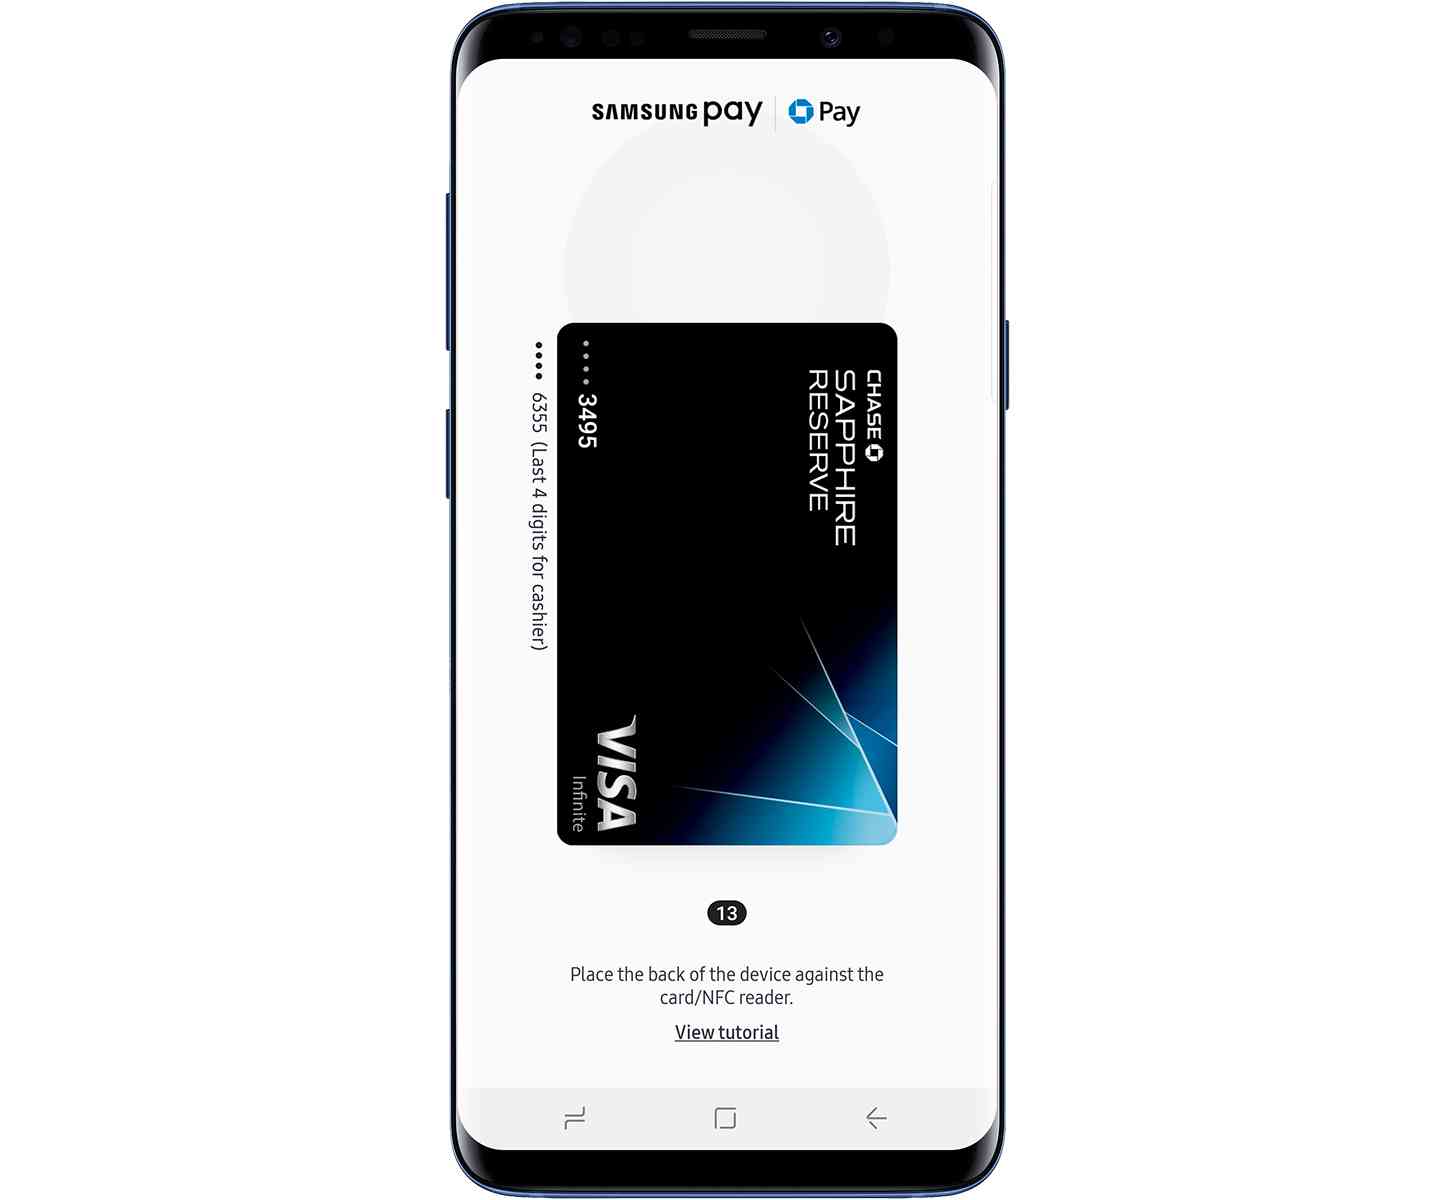 Samsung Pay Chase Pay integration